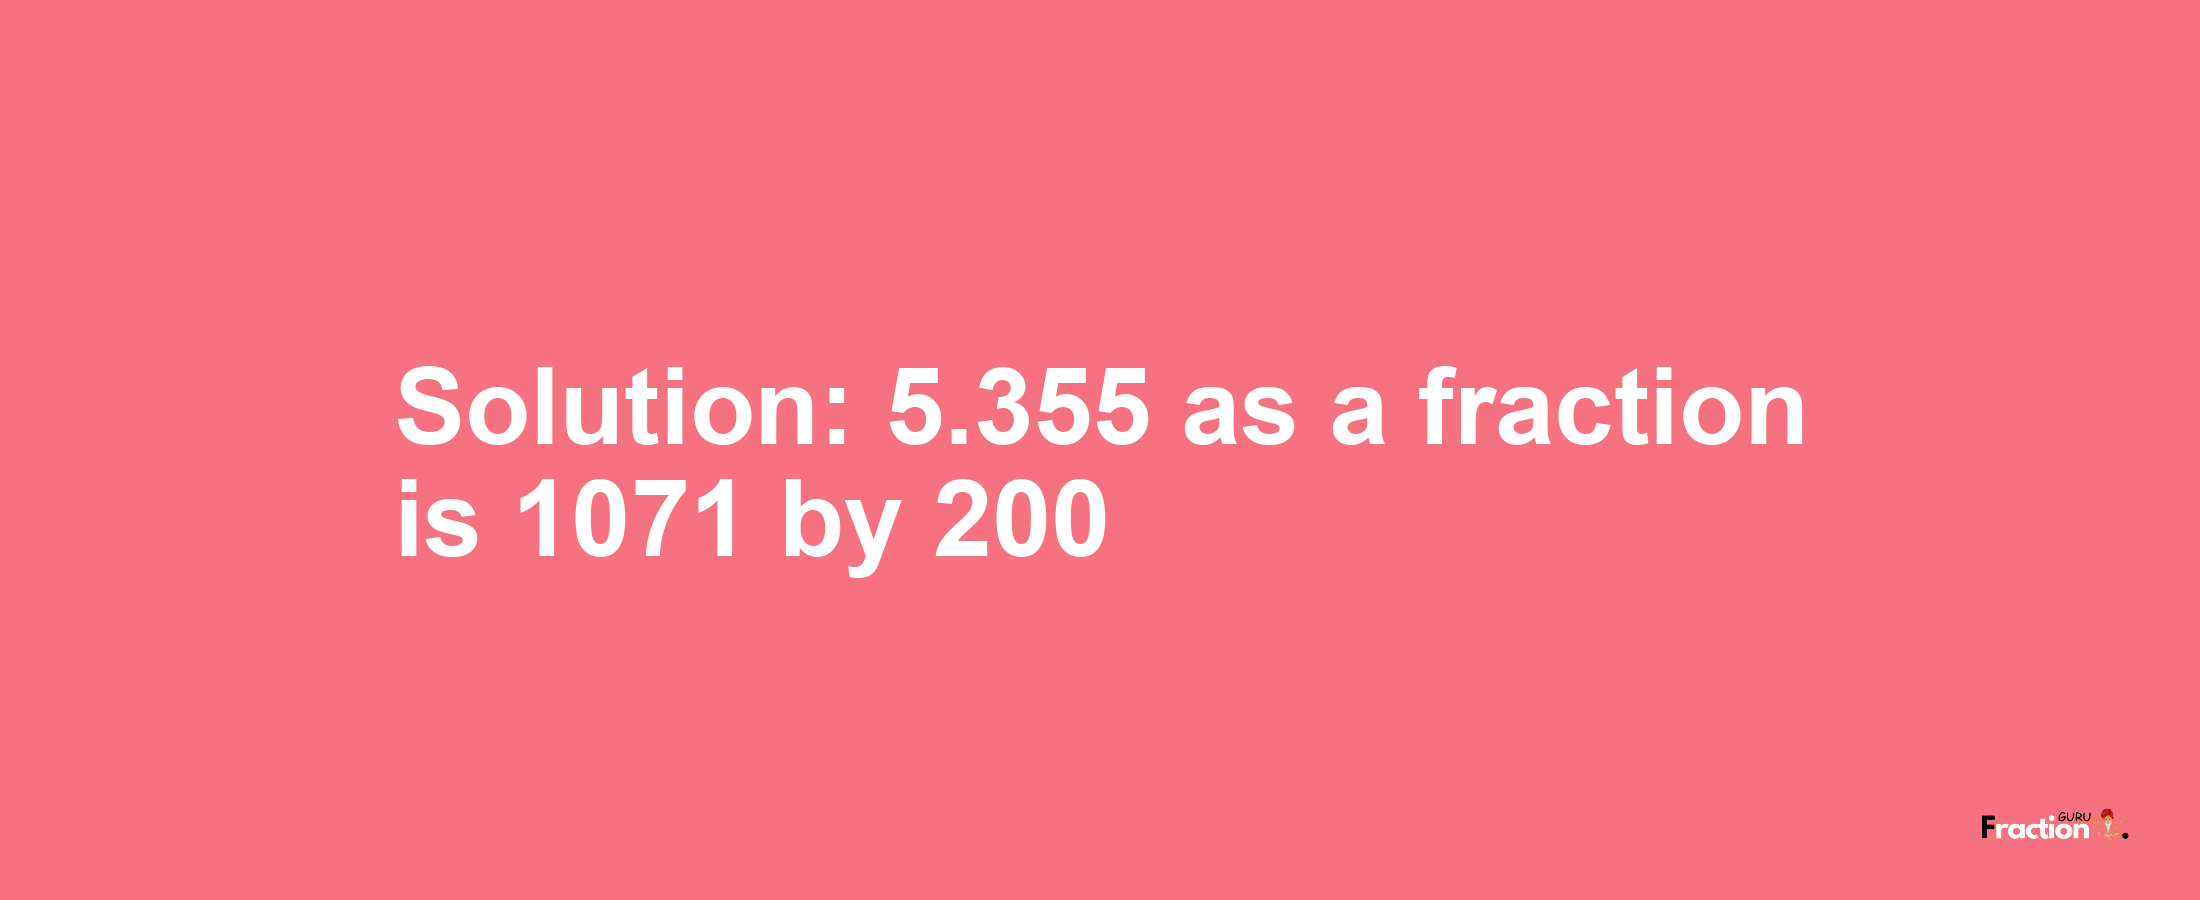 Solution:5.355 as a fraction is 1071/200